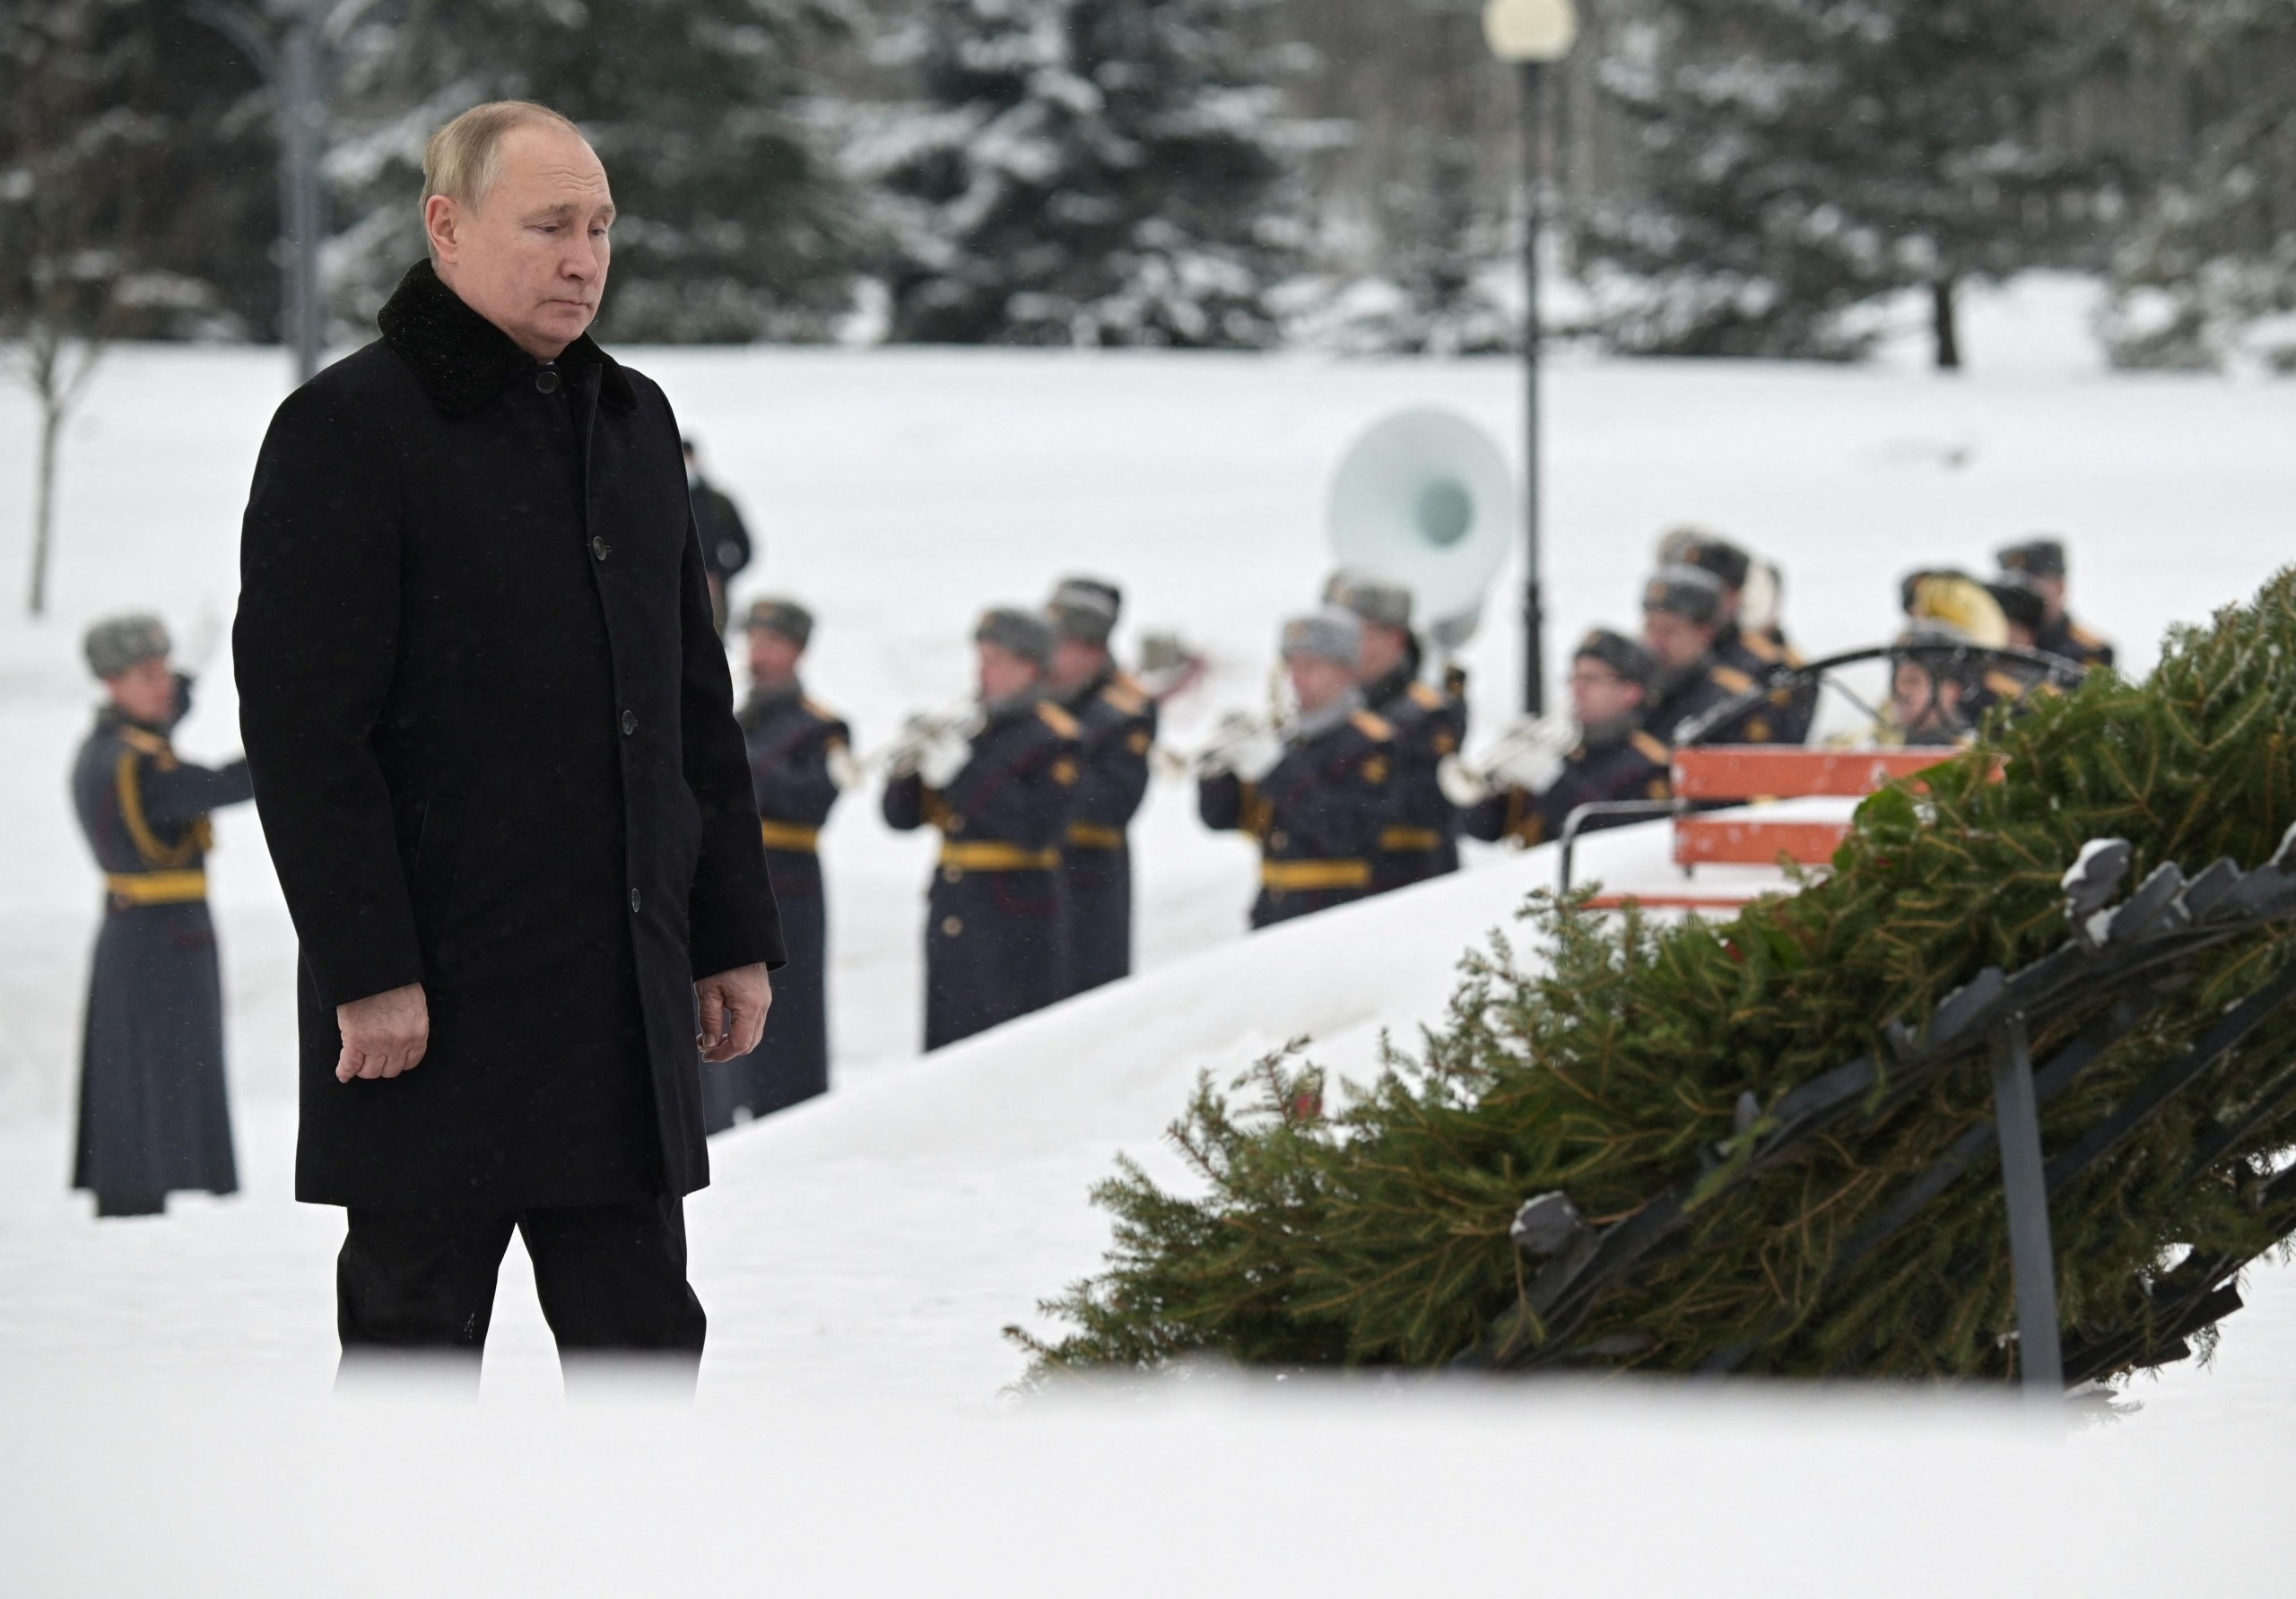 Russian President Vladimir Putin attends a flower-laying ceremony marking the 78th anniversary of lifting of the Leningrad siege during World War Two at the Piskaryovskoye Memorial Cemetery in Saint Petersburg, Russia January 27, 2022. Sputnik/Aleksey Nikolskyi/Kremlin via REUTERS ATTENTION EDITORS - THIS IMAGE WAS PROVIDED BY A THIRD PARTY. Photo: SPUTNIK/REUTERS